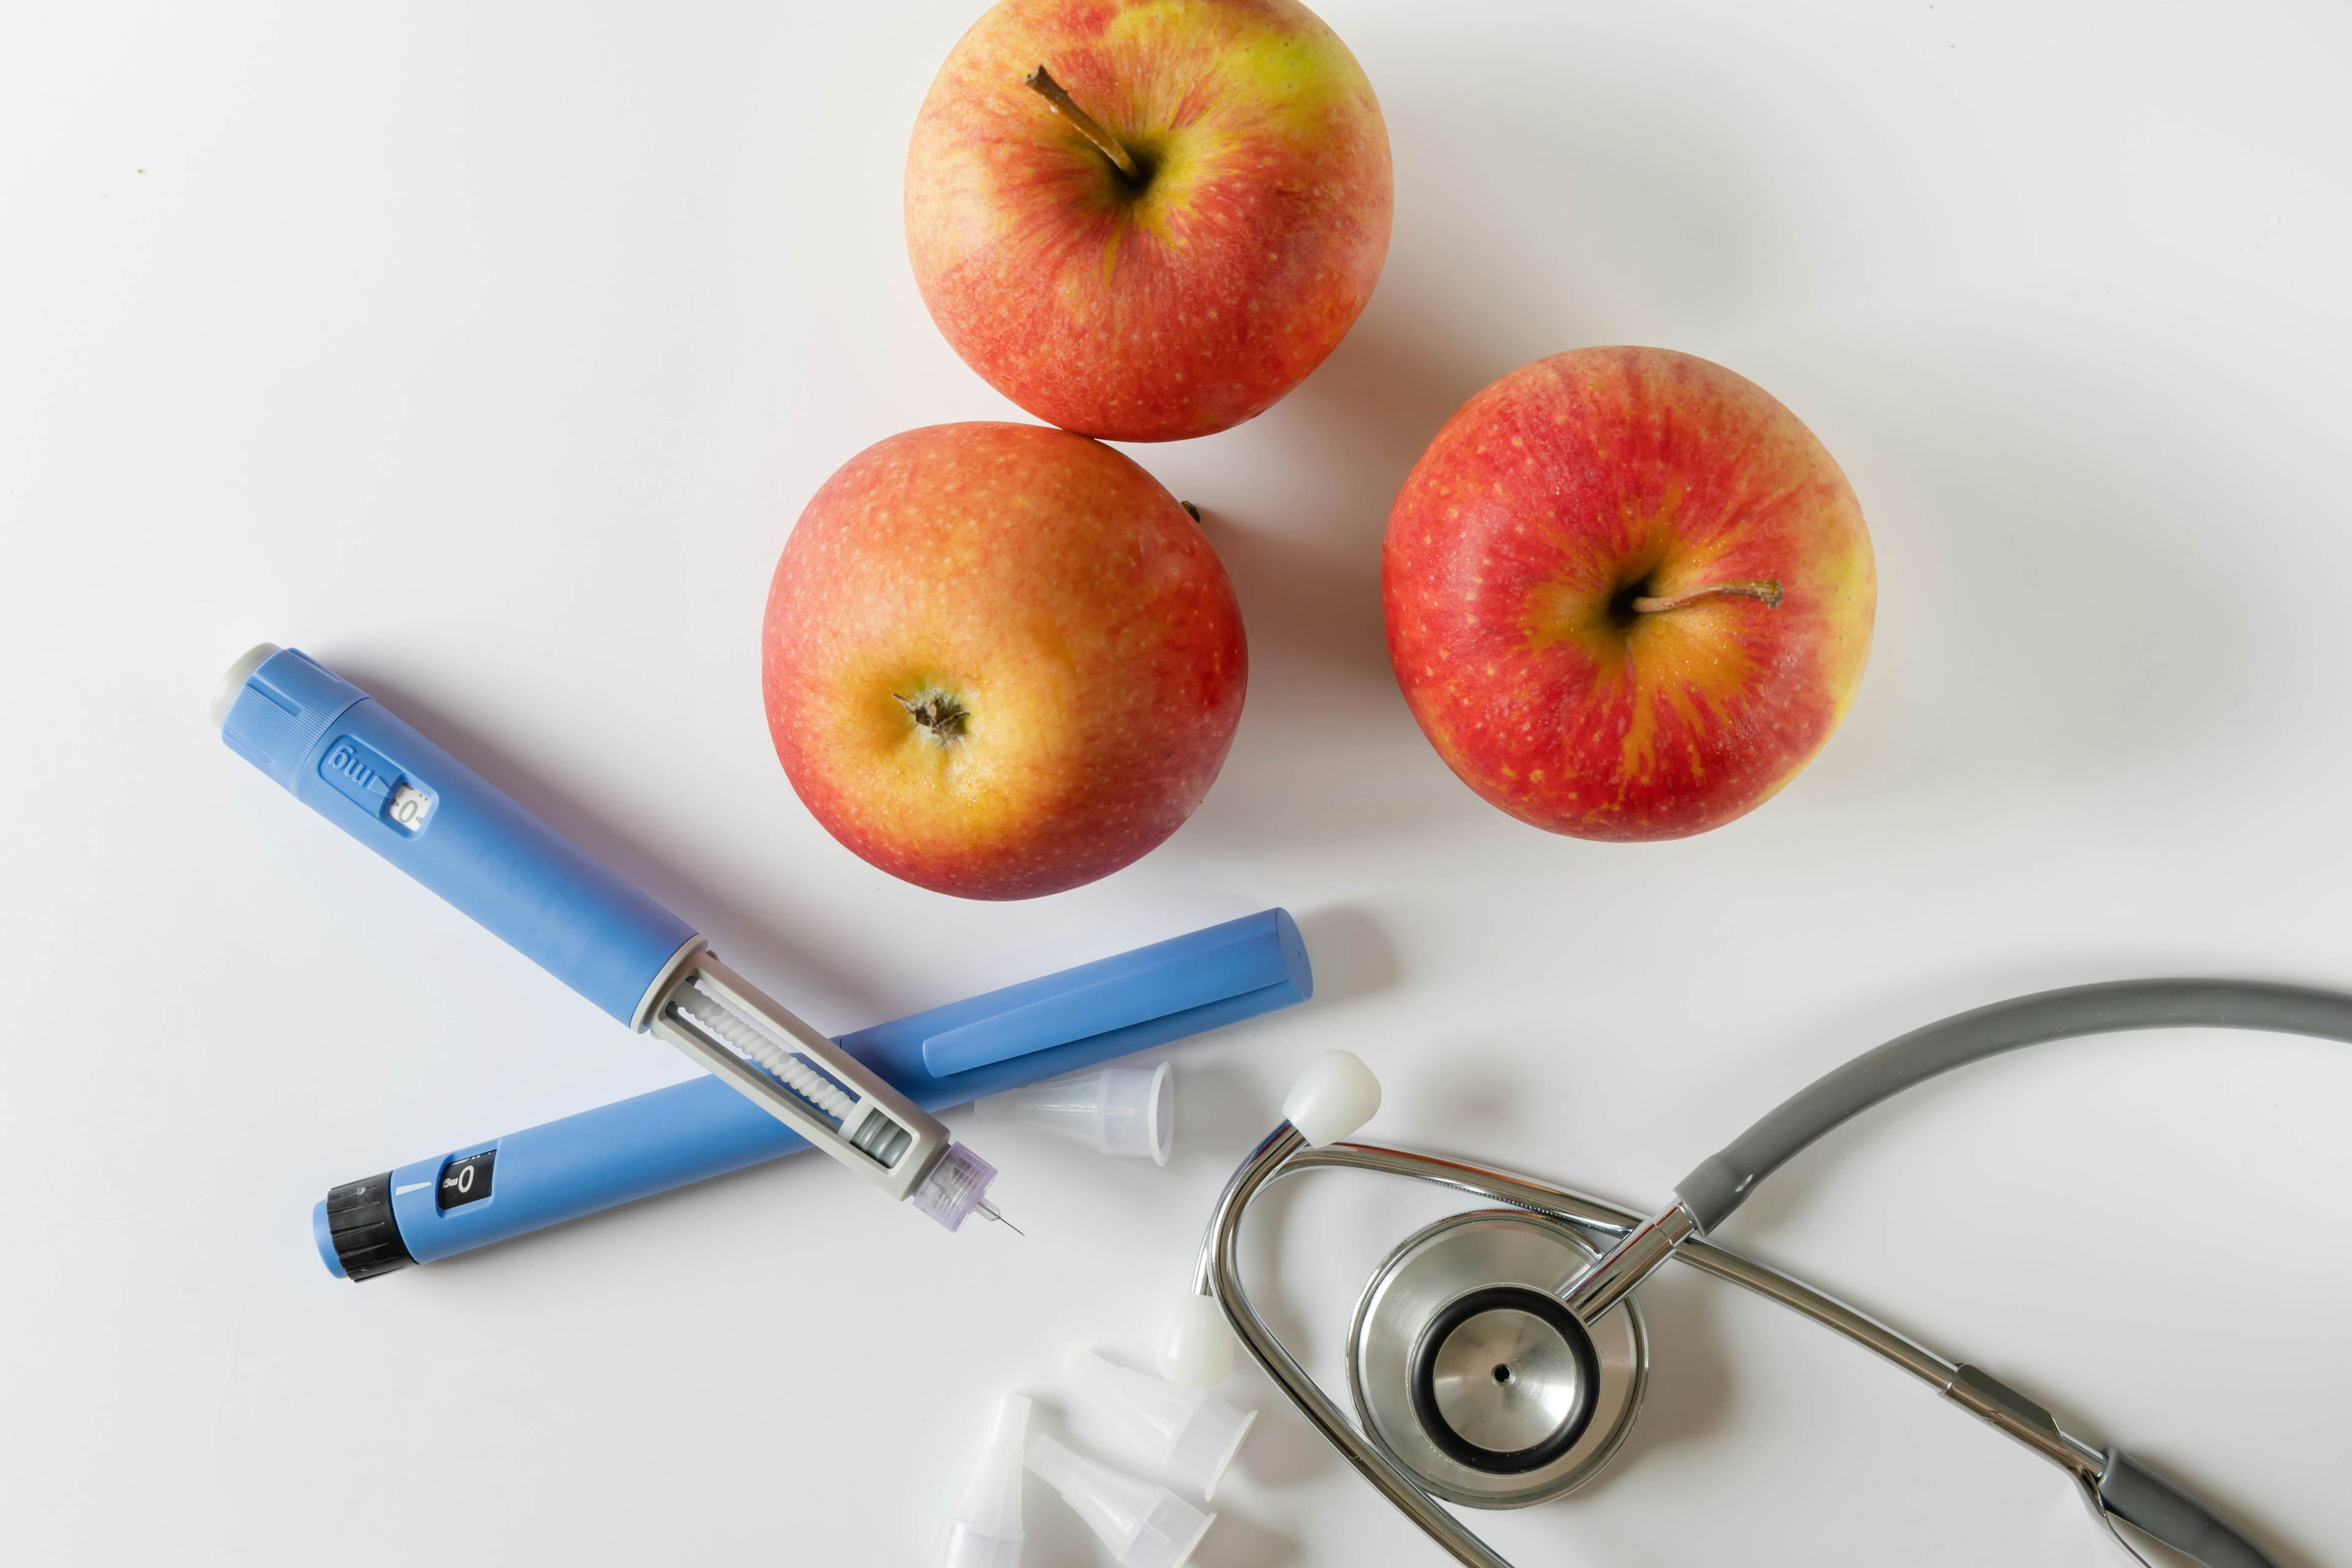 Apples, syringes, and stethoscope.